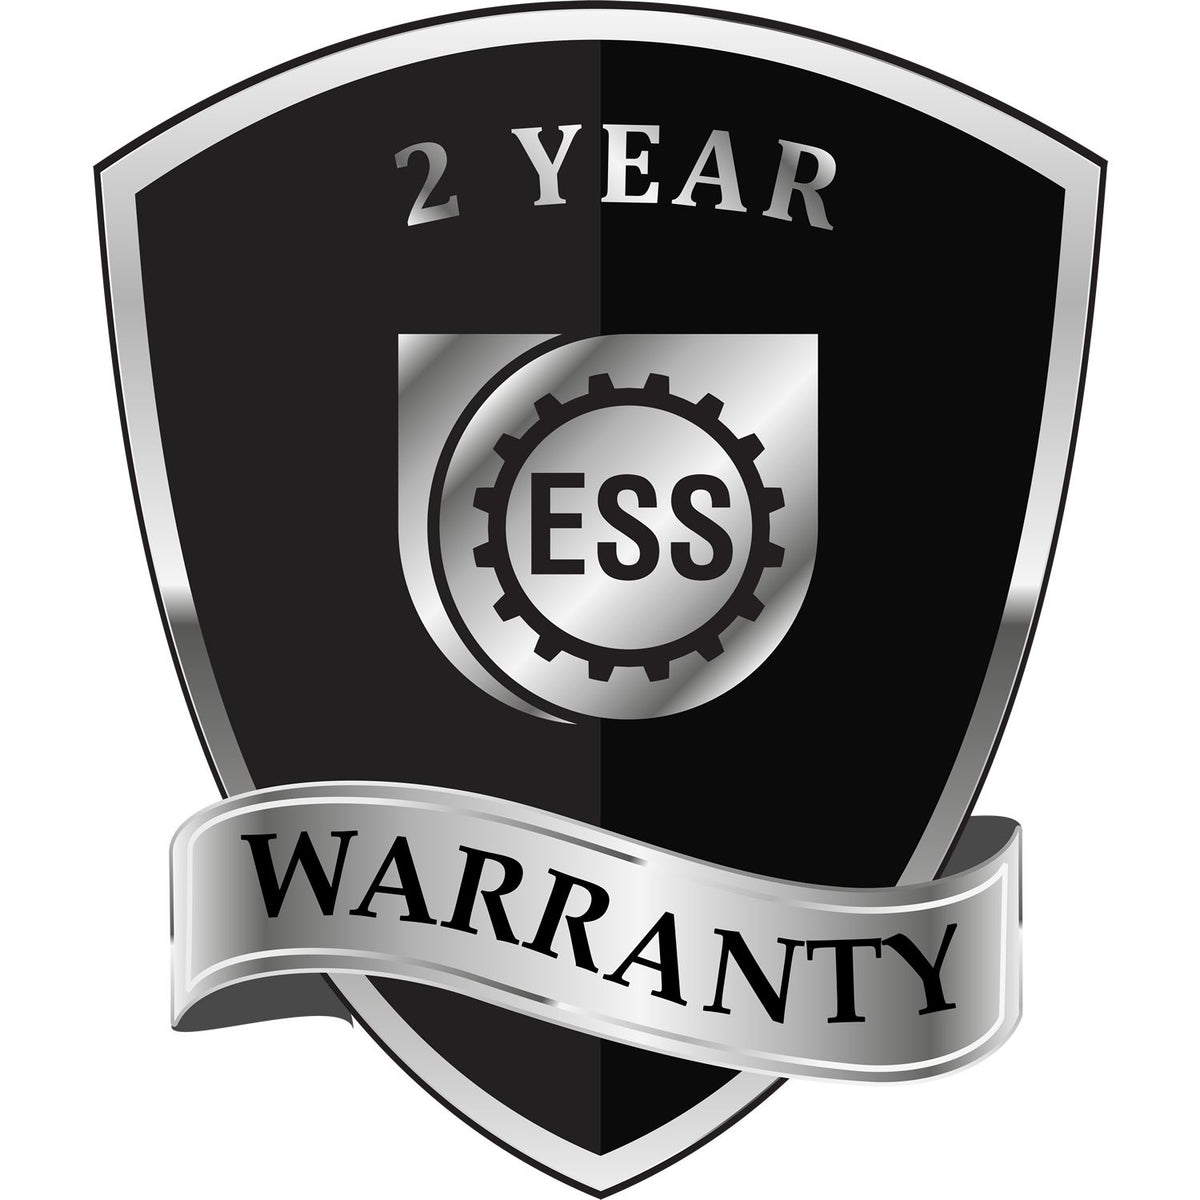 A badge or emblem showing a warranty icon for the State of Georgia Extended Long Reach Engineer Seal